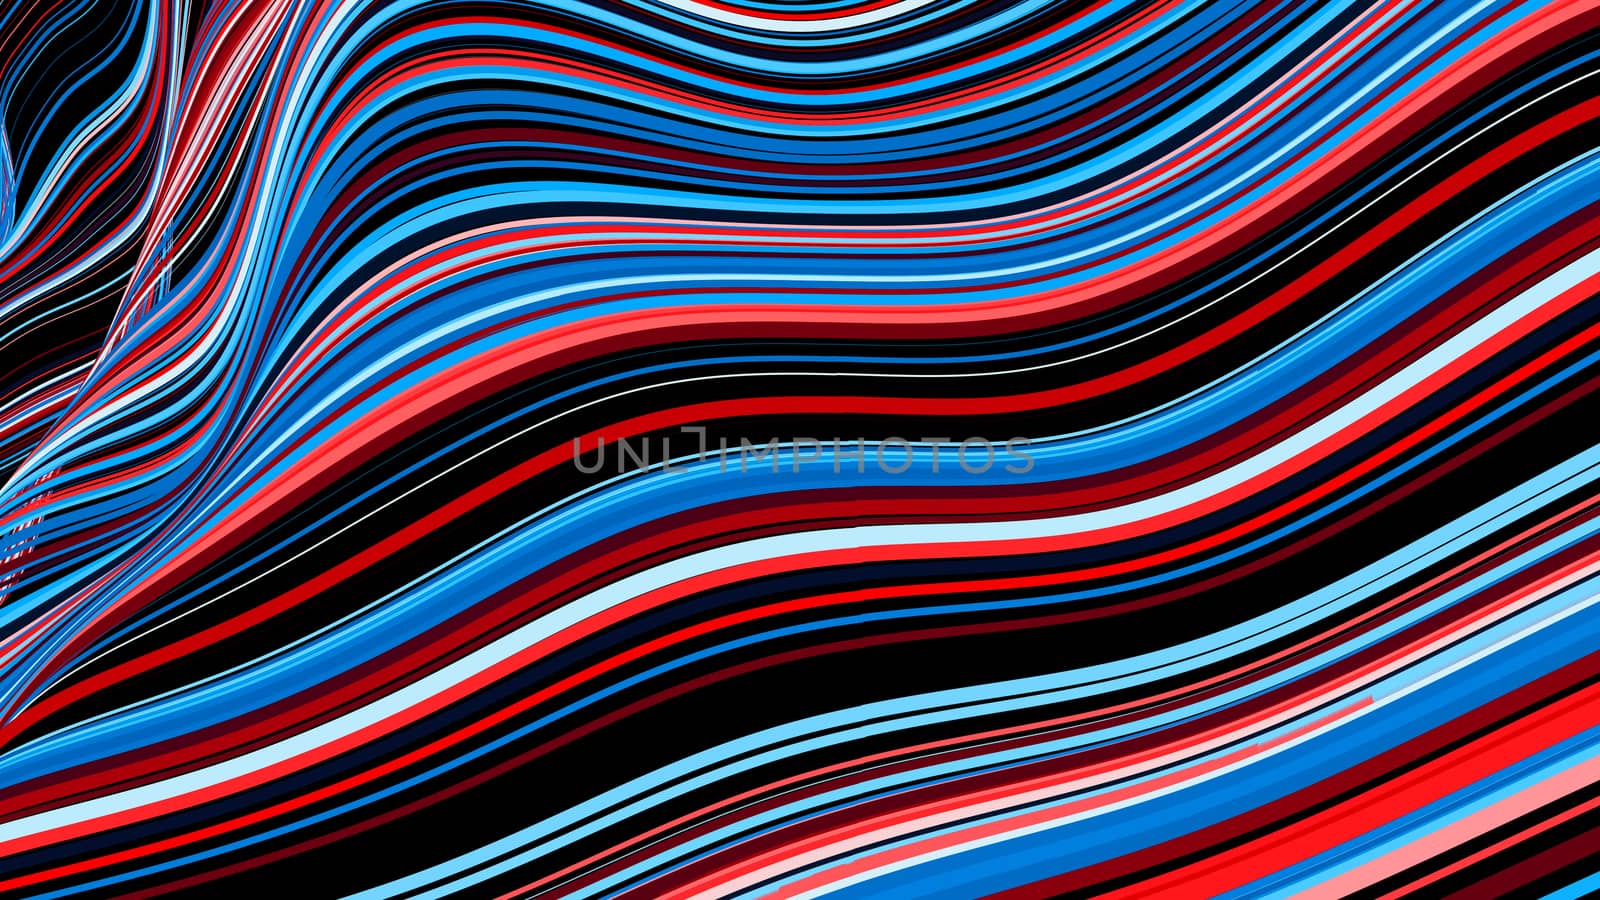 Abstract background with colorful wavy lines. 3d rendered